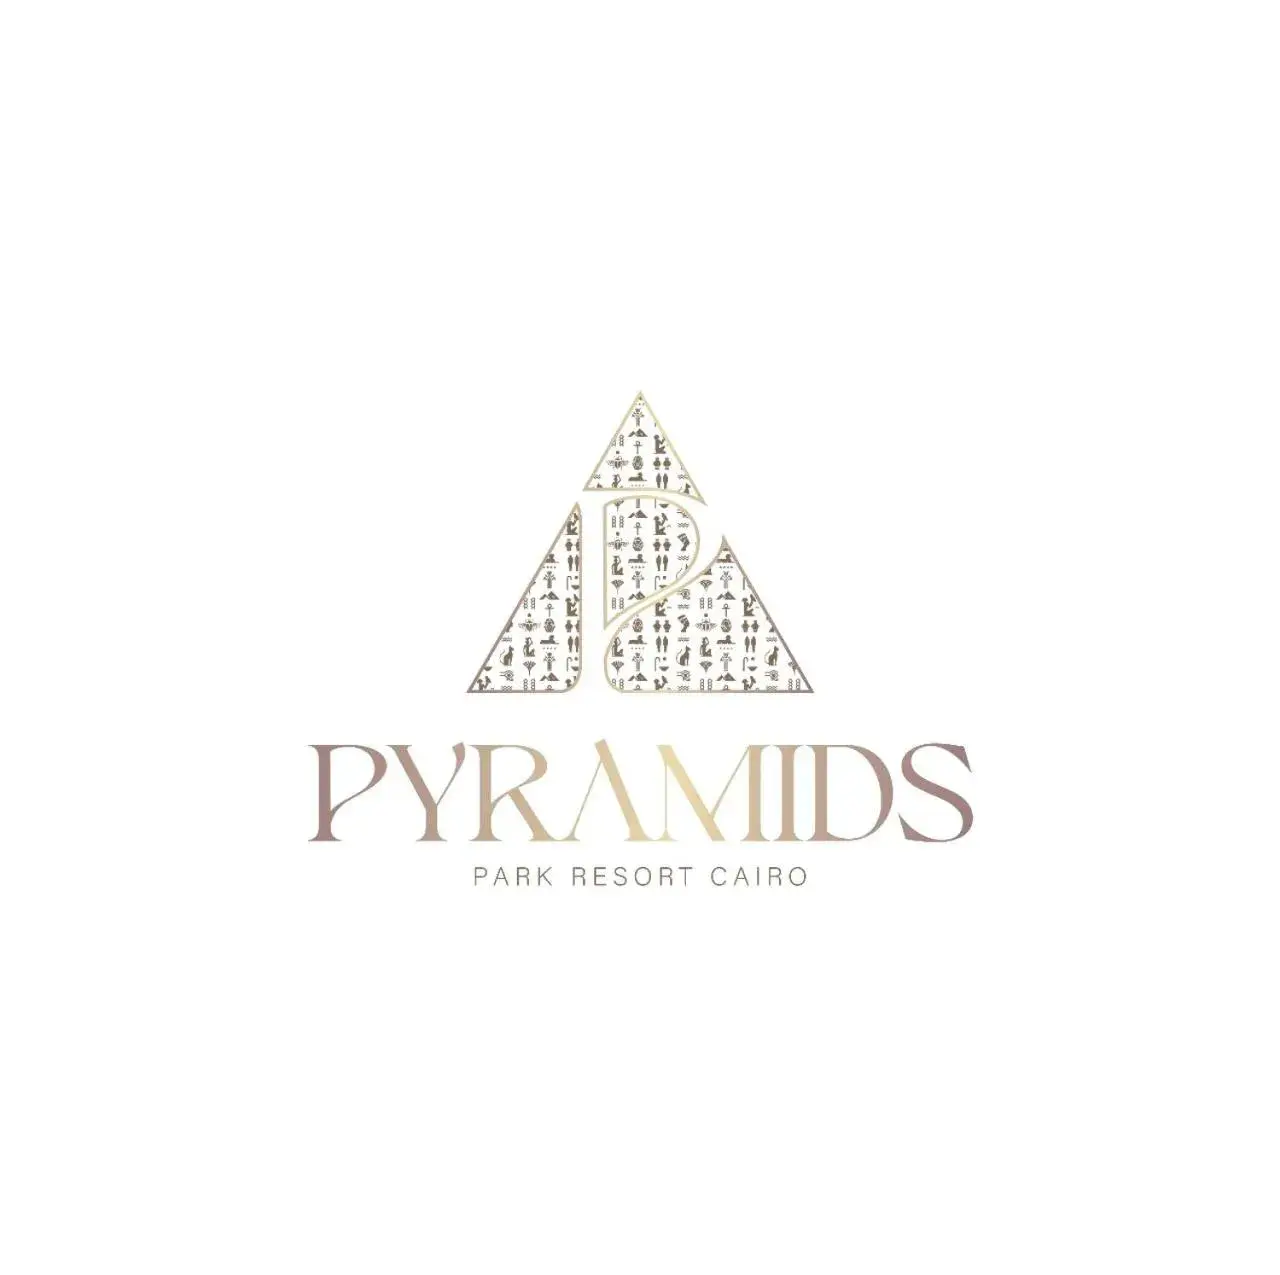 Property logo or sign, Property Logo/Sign in Pyramids Park Resort Cairo